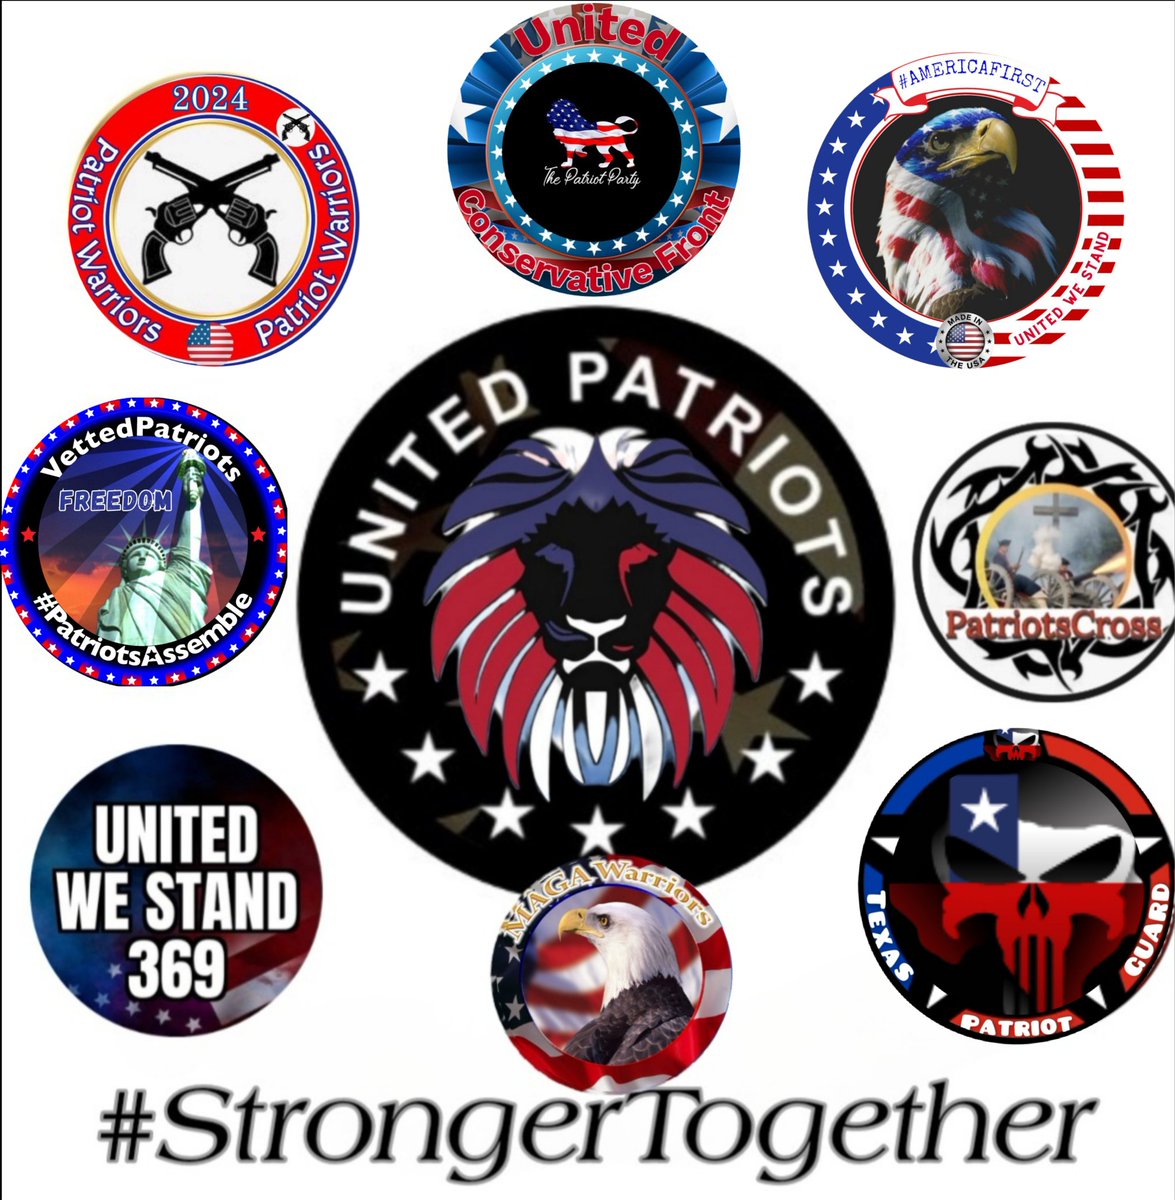 🤝Unity above Egos. We are Your Patriotic Communty Twitter groups. 
Believe in Freedom of choice Not Tyrannical divisive rules 
#UnitedPatriots2024

#VettedPatriots 
#UnitedConservativeFront 
#Patriotwarriors 
#UnitedWeStand
#PatriotsCross 
#UnitedWeStand369 
#TexasPatriotGuard